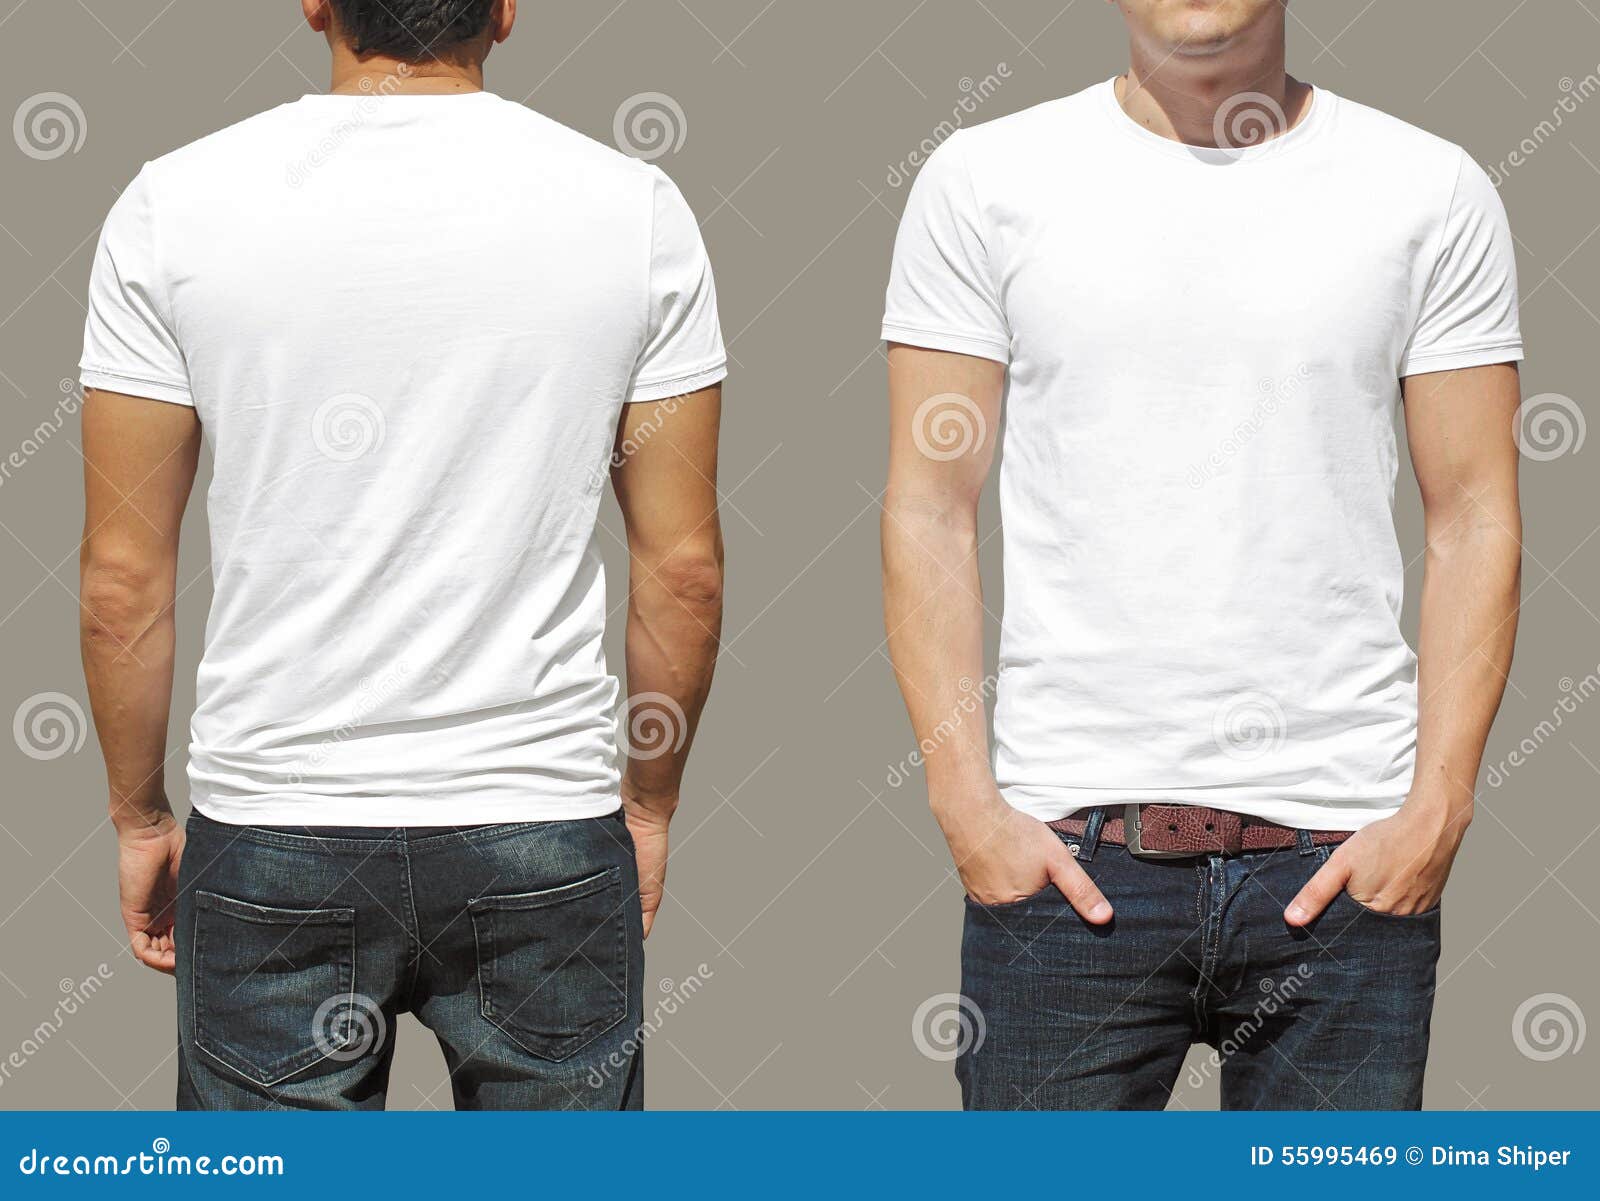 white tshirt on a young man template